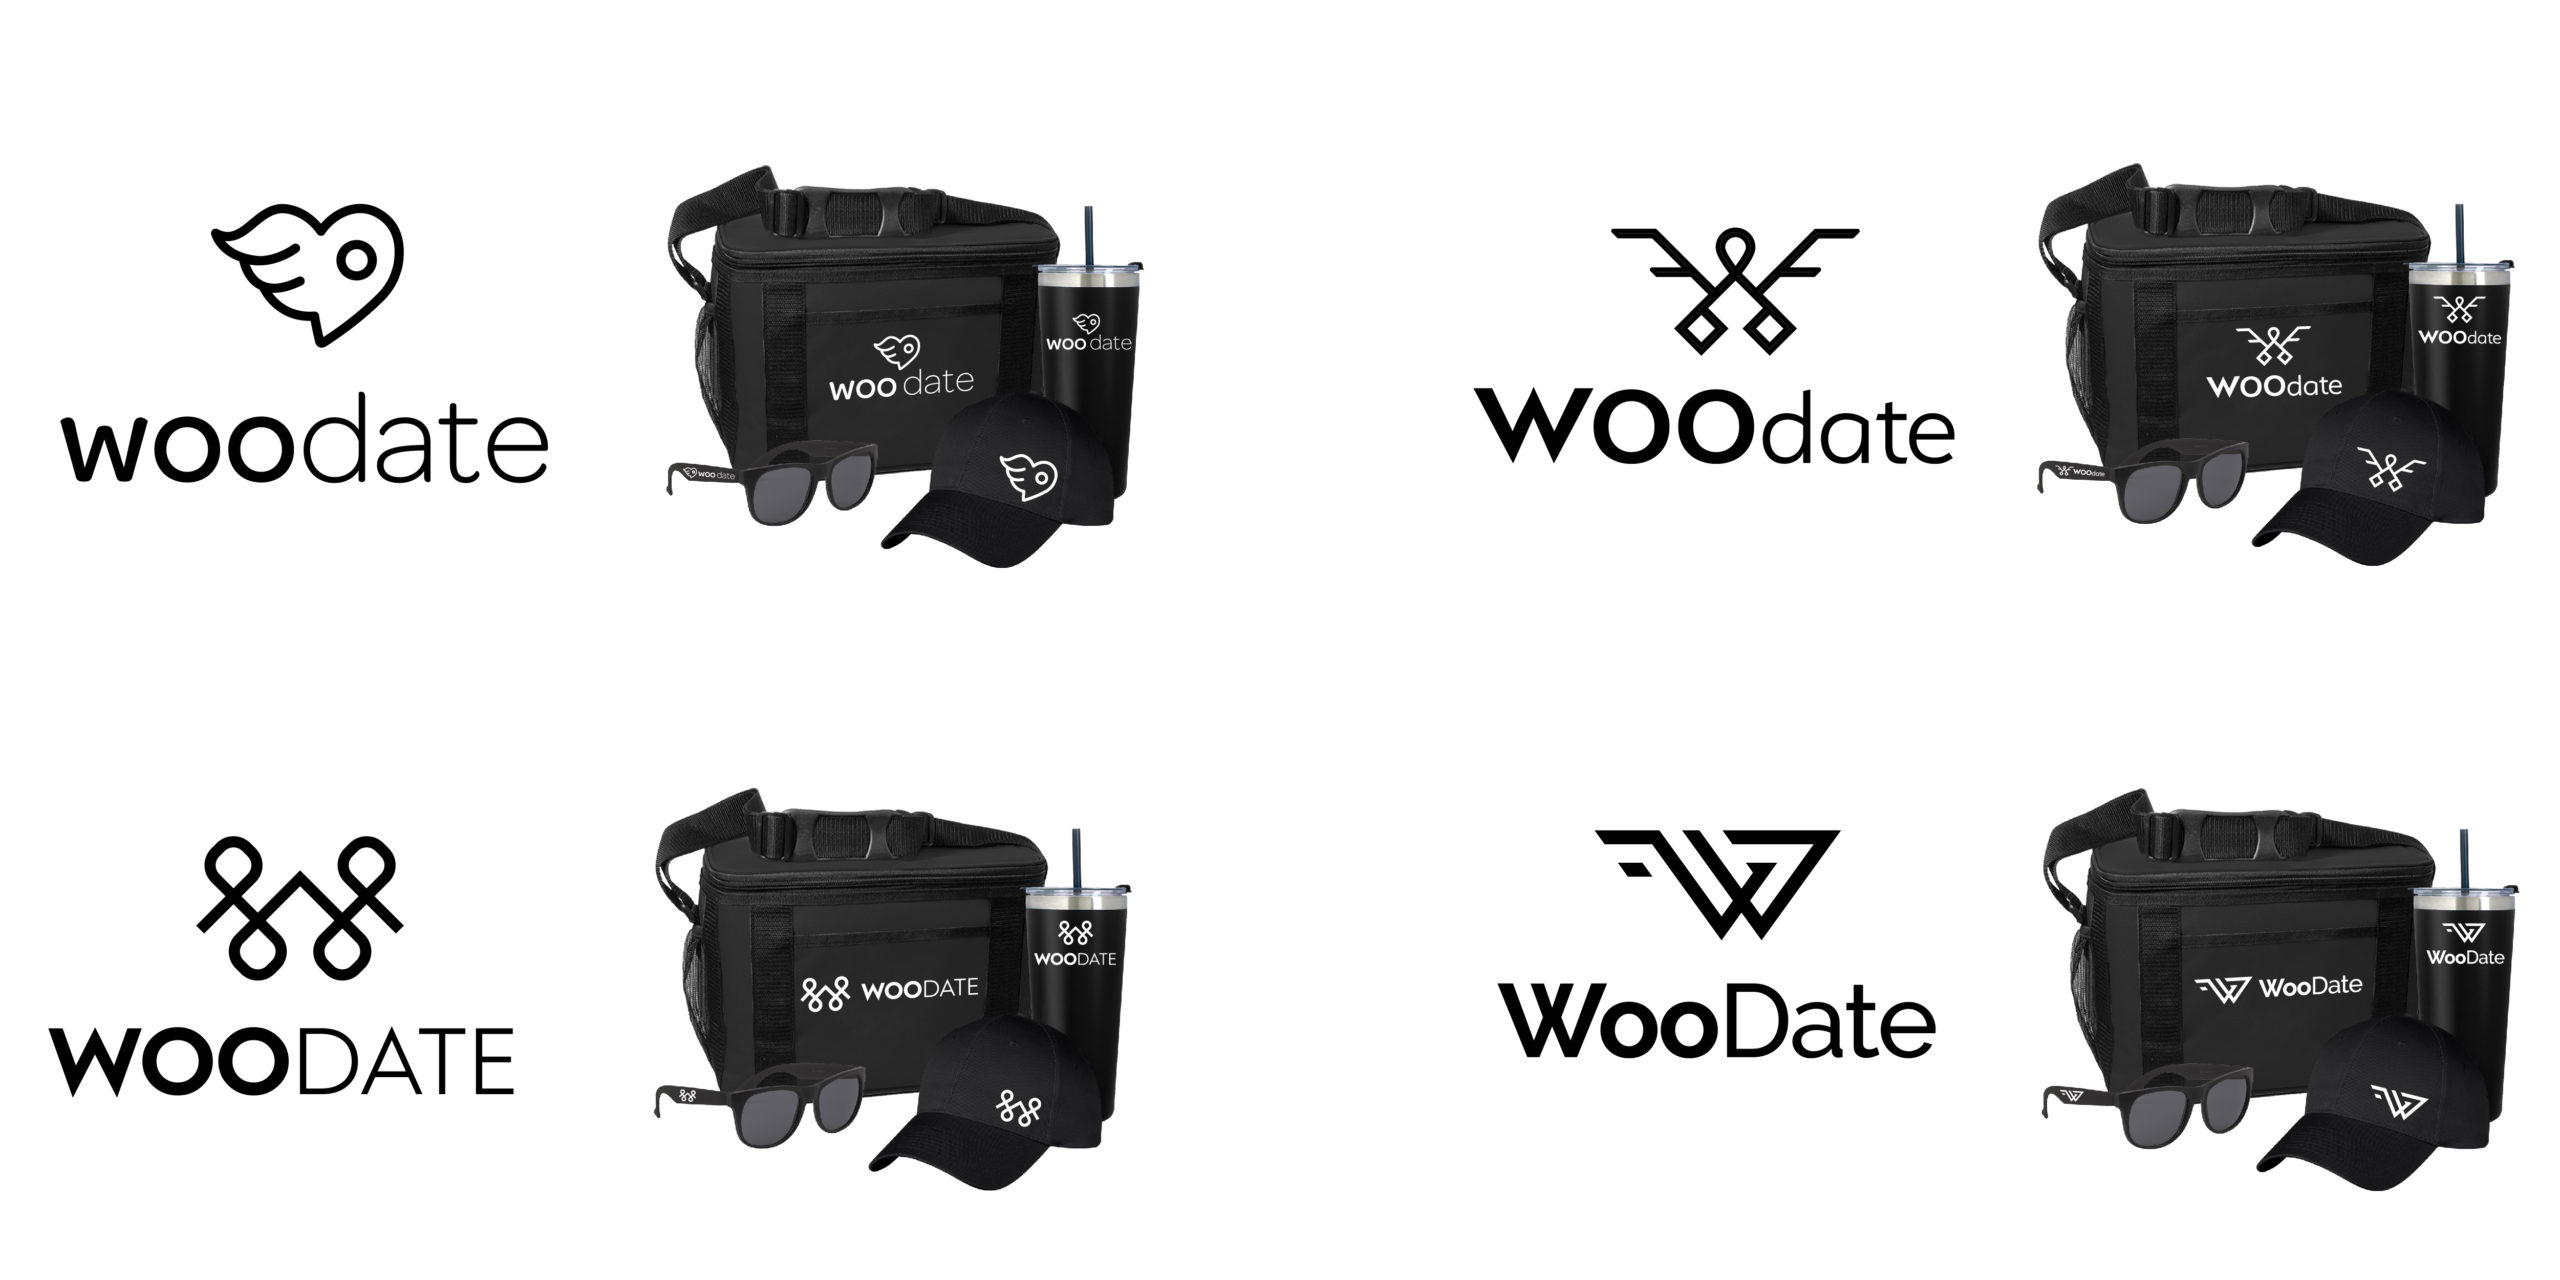 new logo for woodate; a half heart with wings that doubles as a map pin